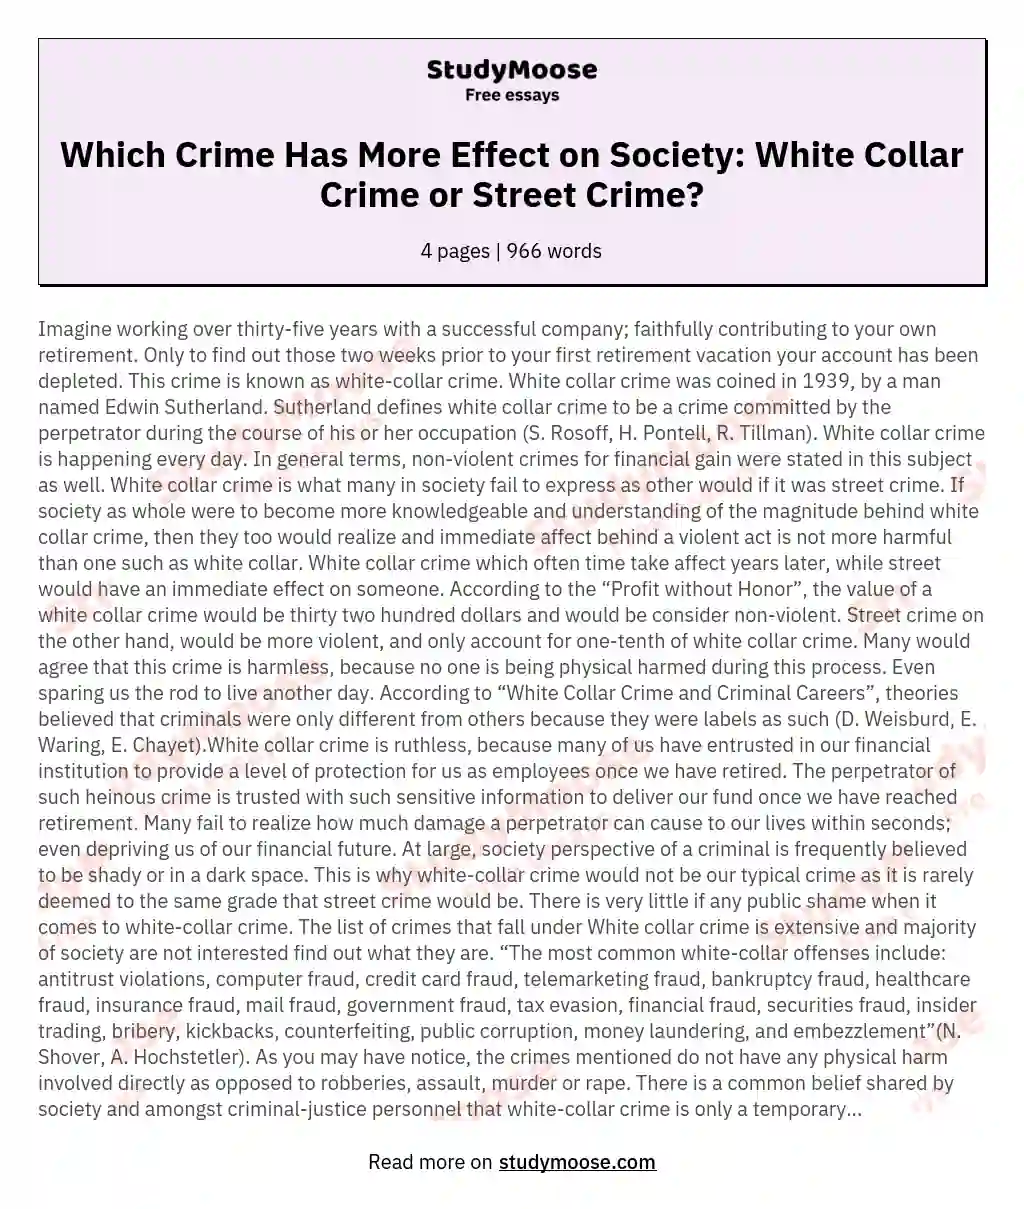 Which Crime Has More Effect on Society: White Collar Crime or Street Crime?